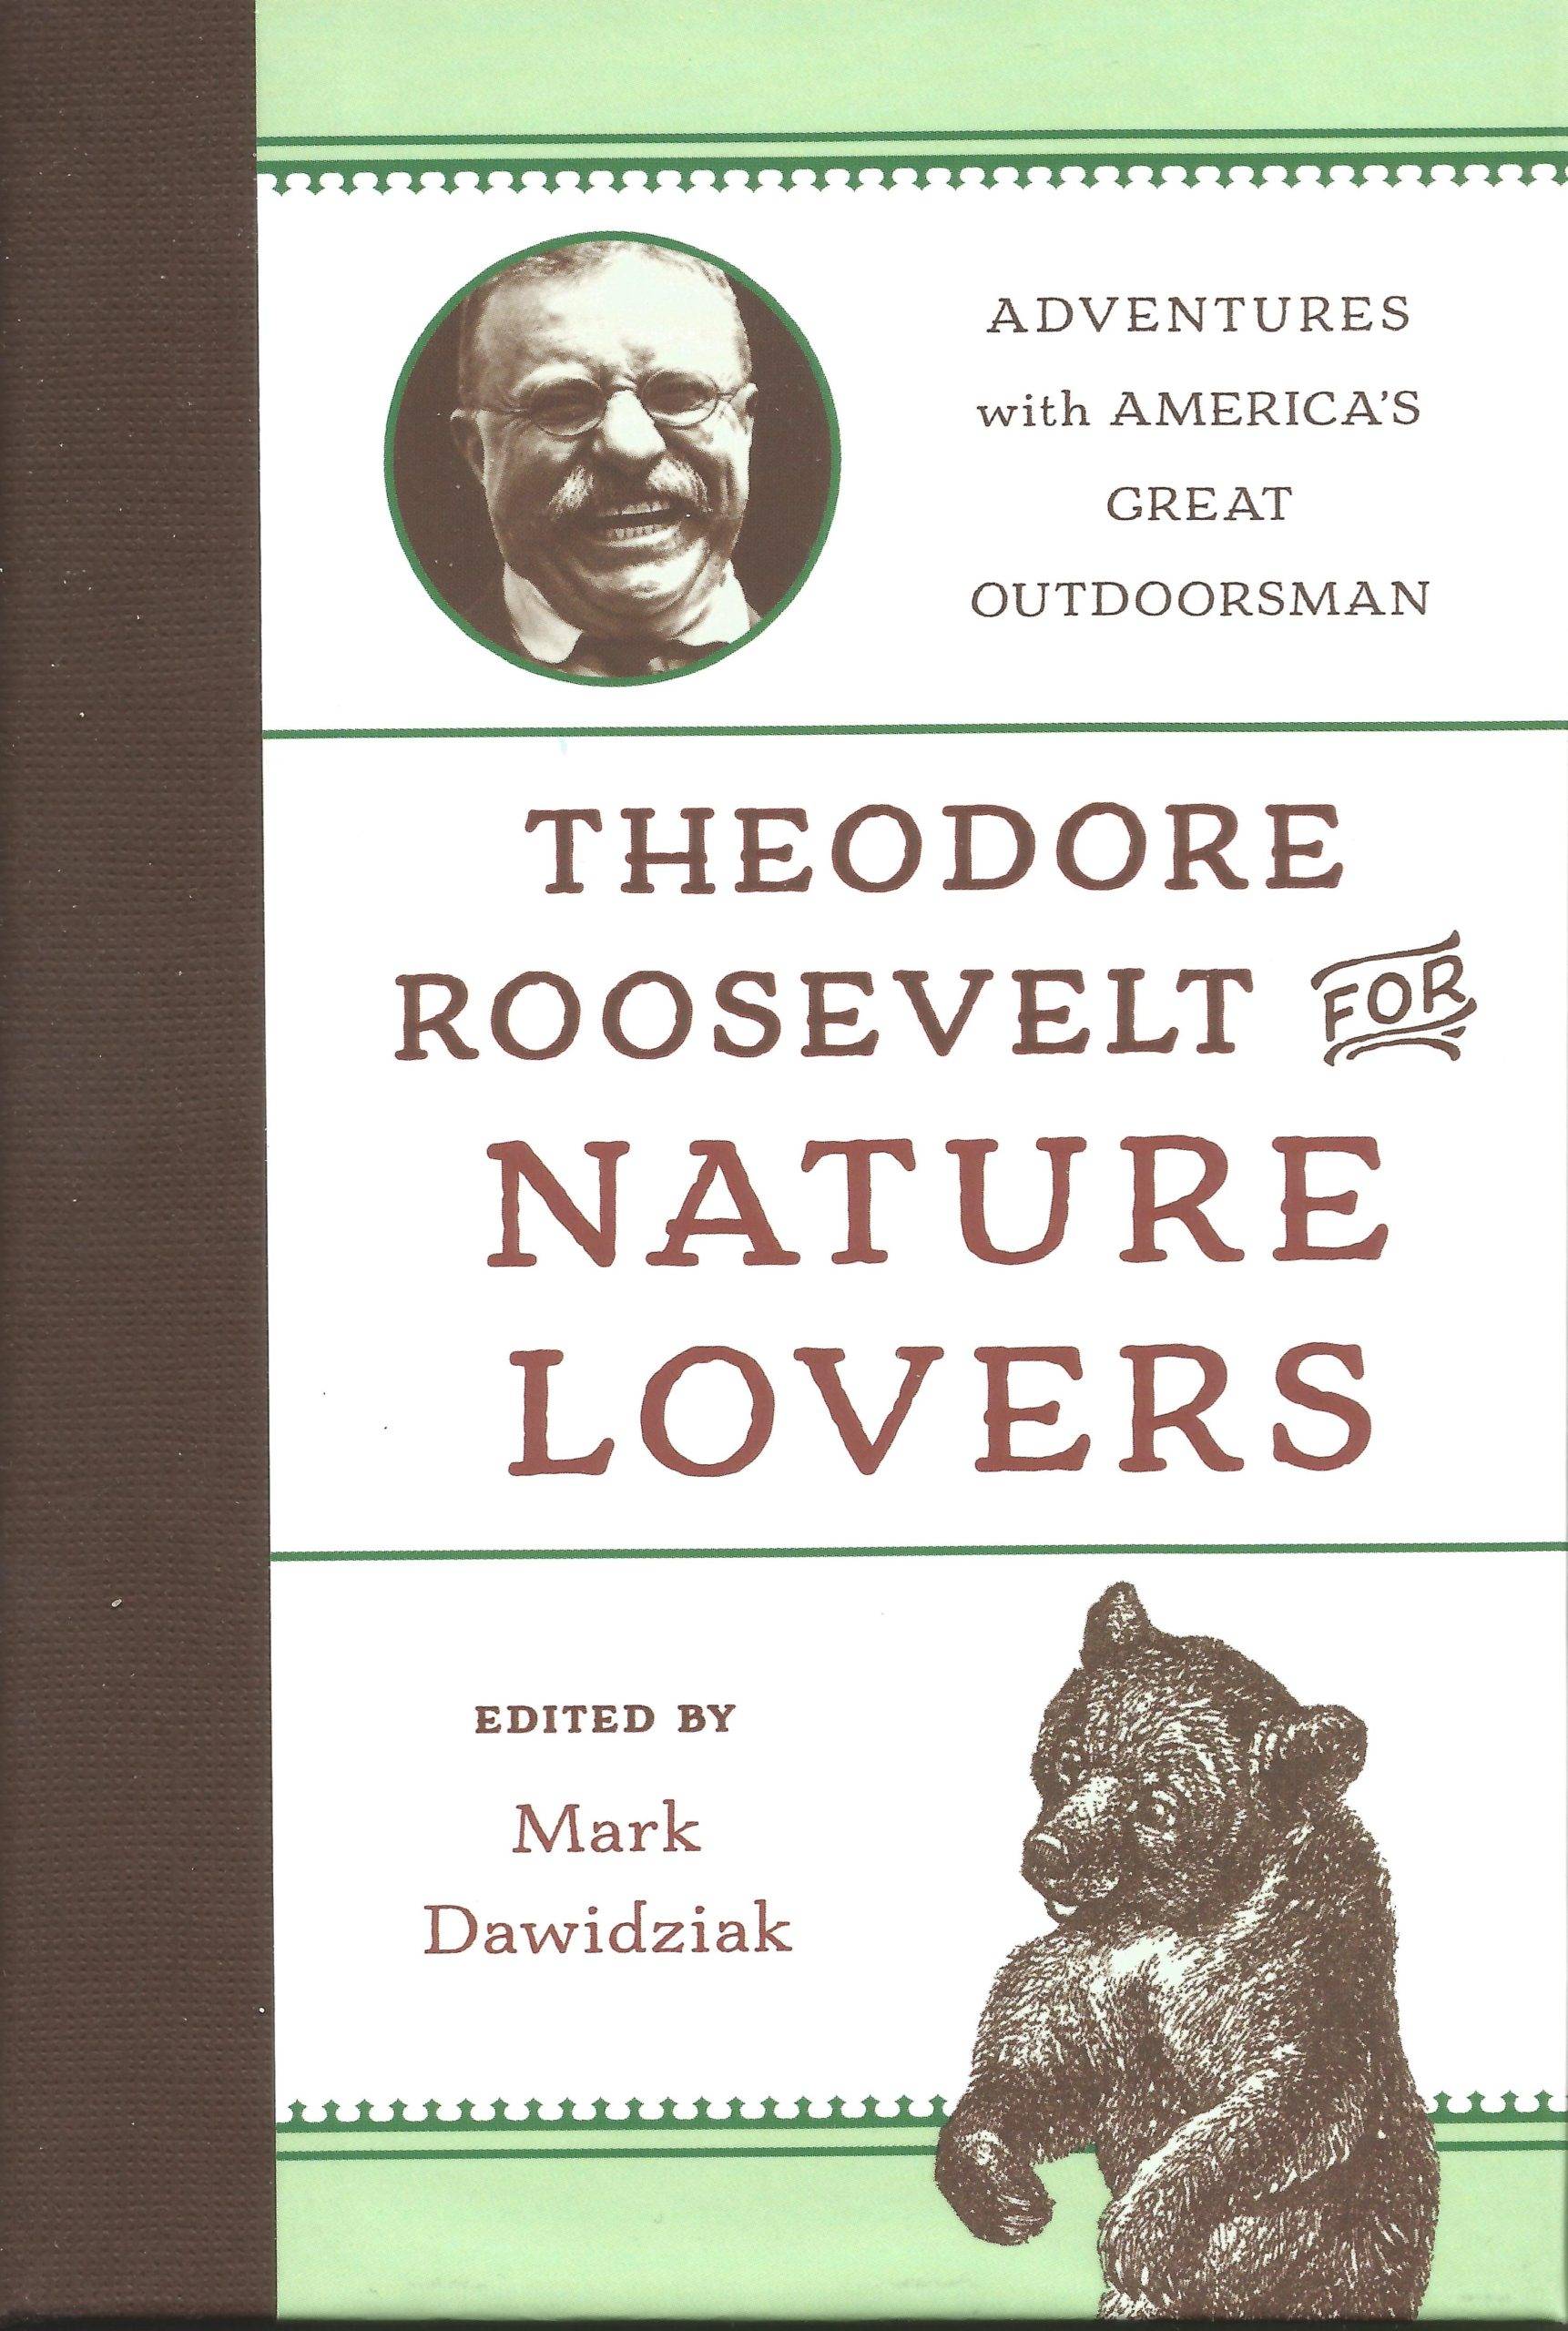 Theodore Roosevelt for Nature Lovers